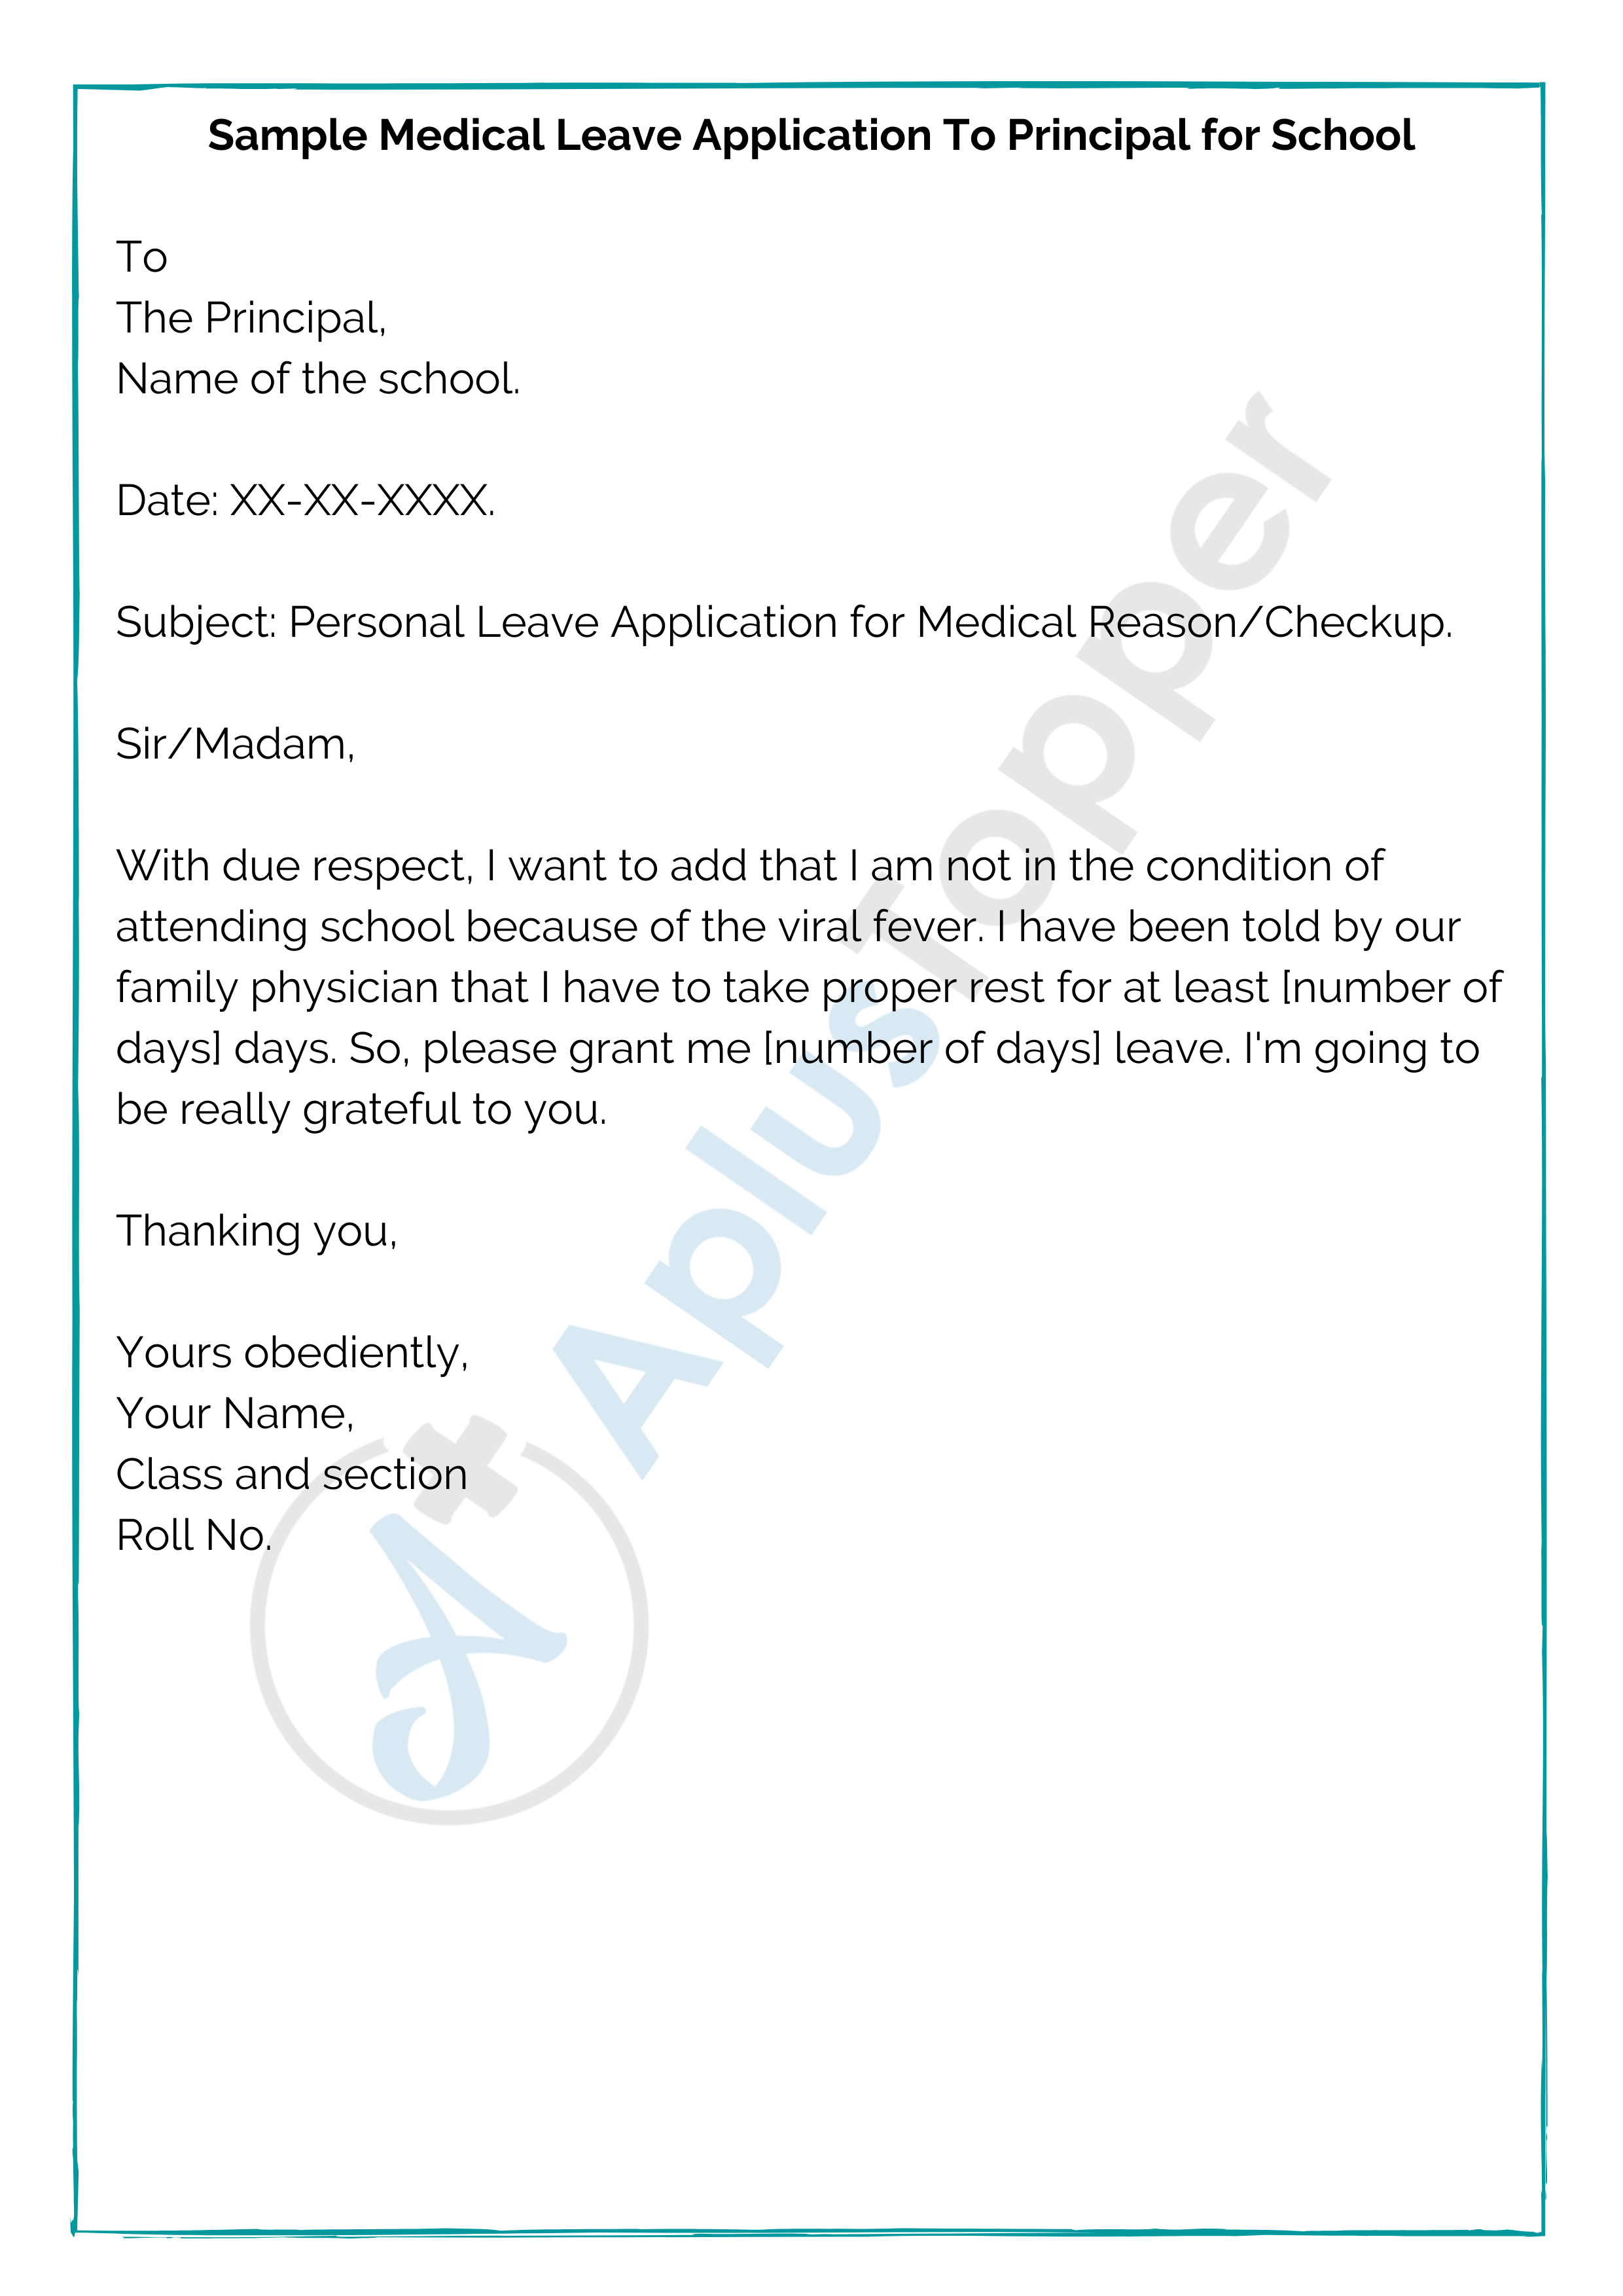 Medical Leave Application | How To Write A Medical Leave Application